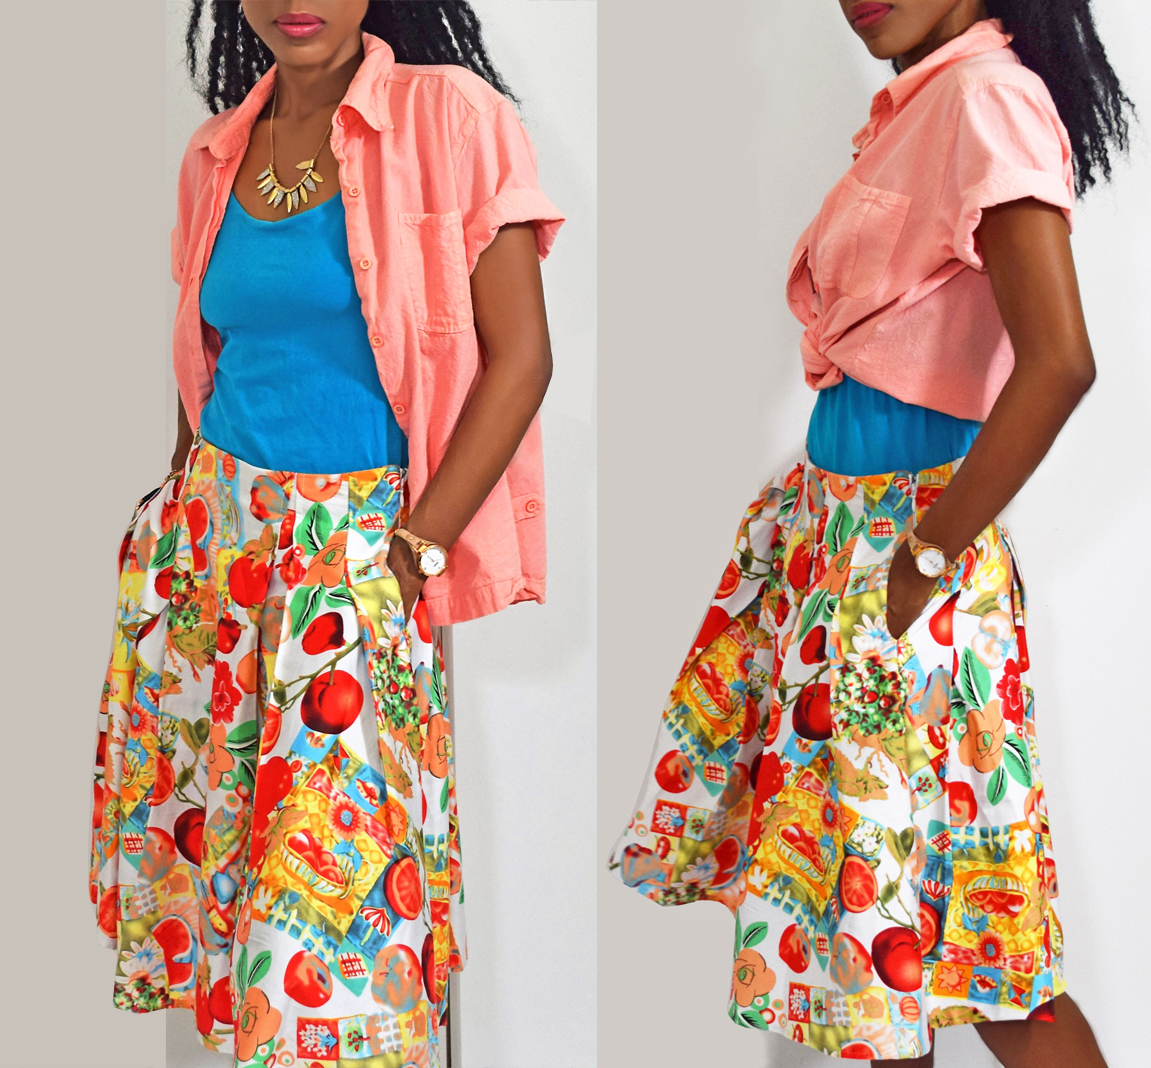 Grace Karin apples pomegranates fruits and flowers print skater skirt peach shirt over turquoise tank top